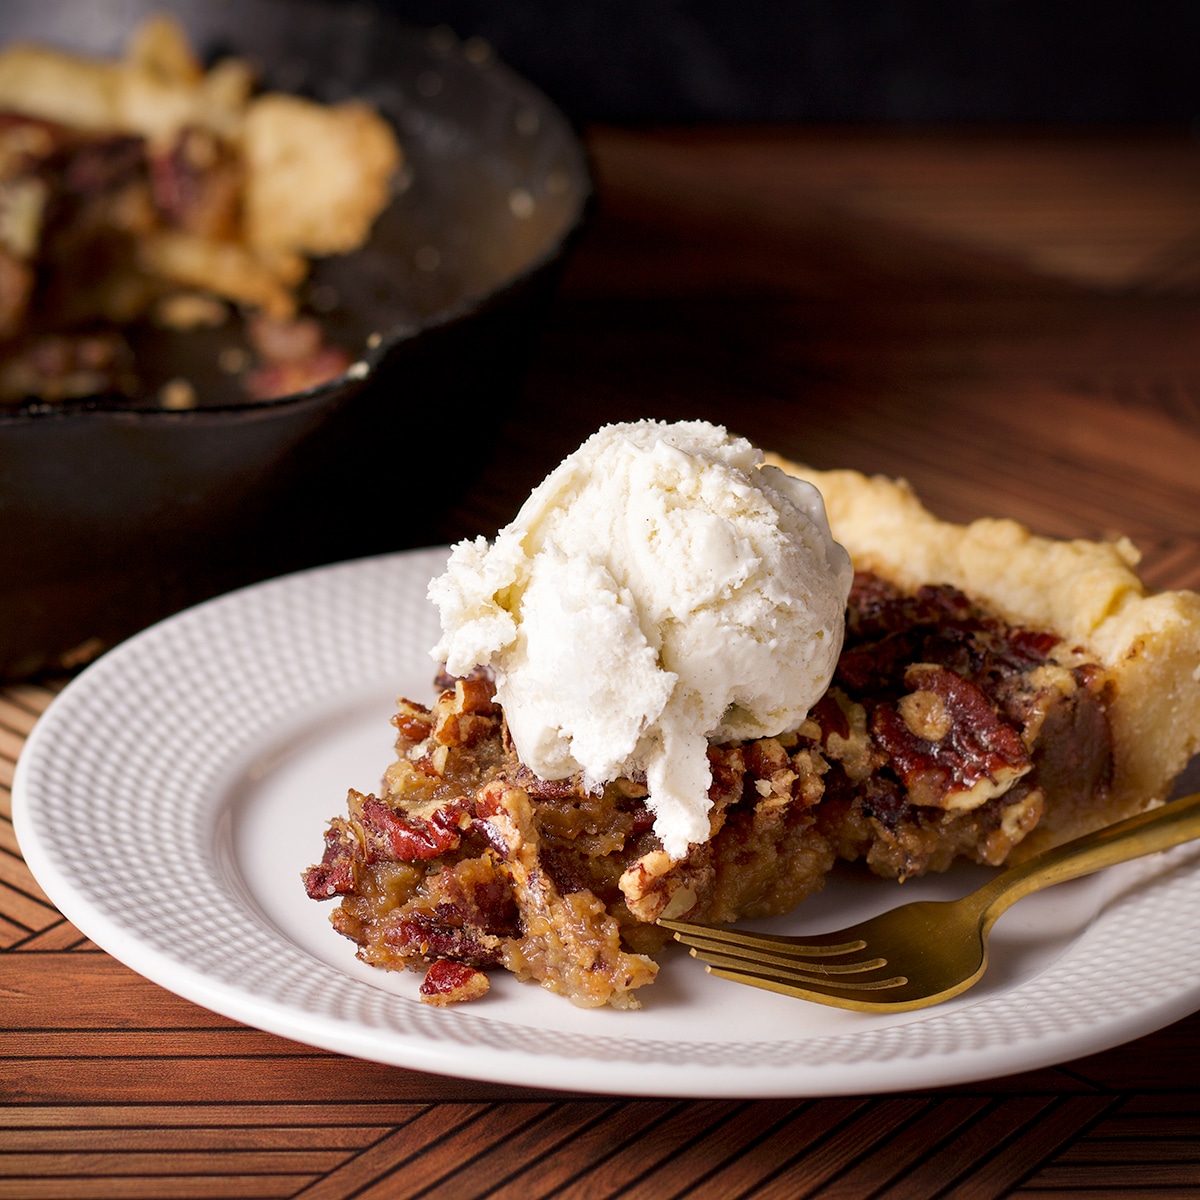 A slice of pecan pie on a plate topped with a scoop of vanilla ice cream.